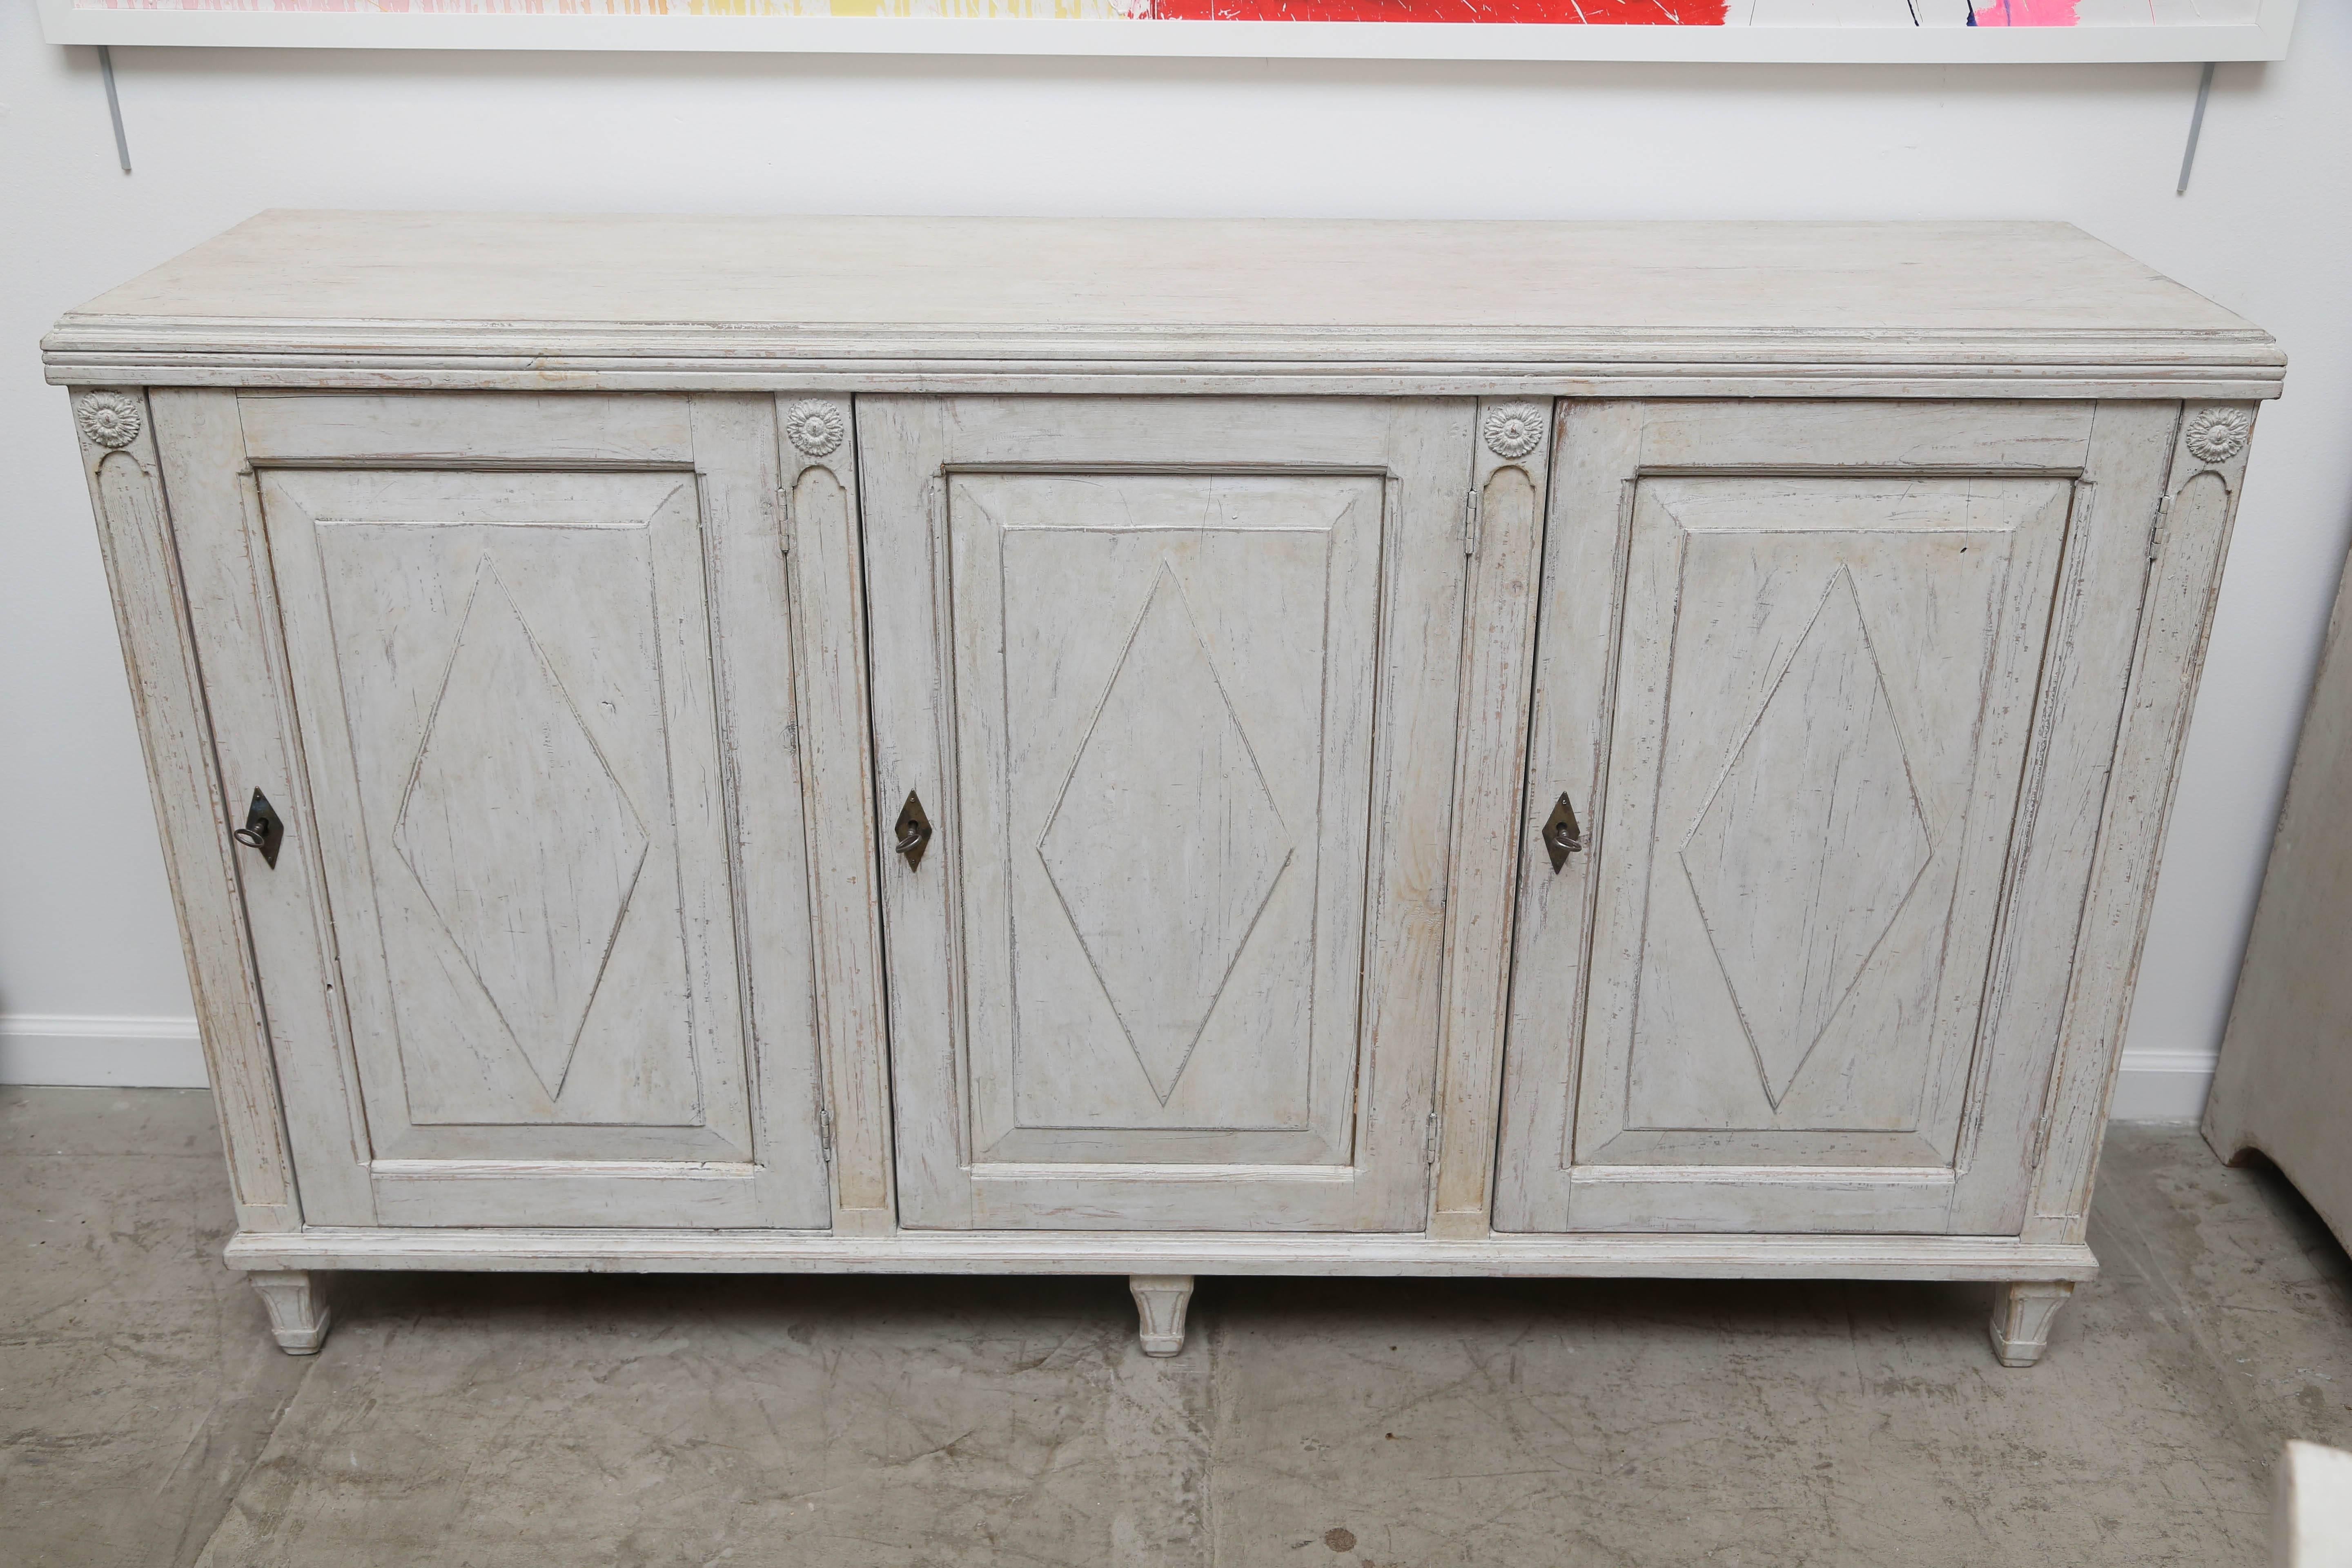 Antique Swedish Gustavian style painted three-door buffet, the doors have raised panels with a diamond motif in the centre of each, simple top with crown molding border. Carved arched design between each door and carved rosette
at top of each arch.